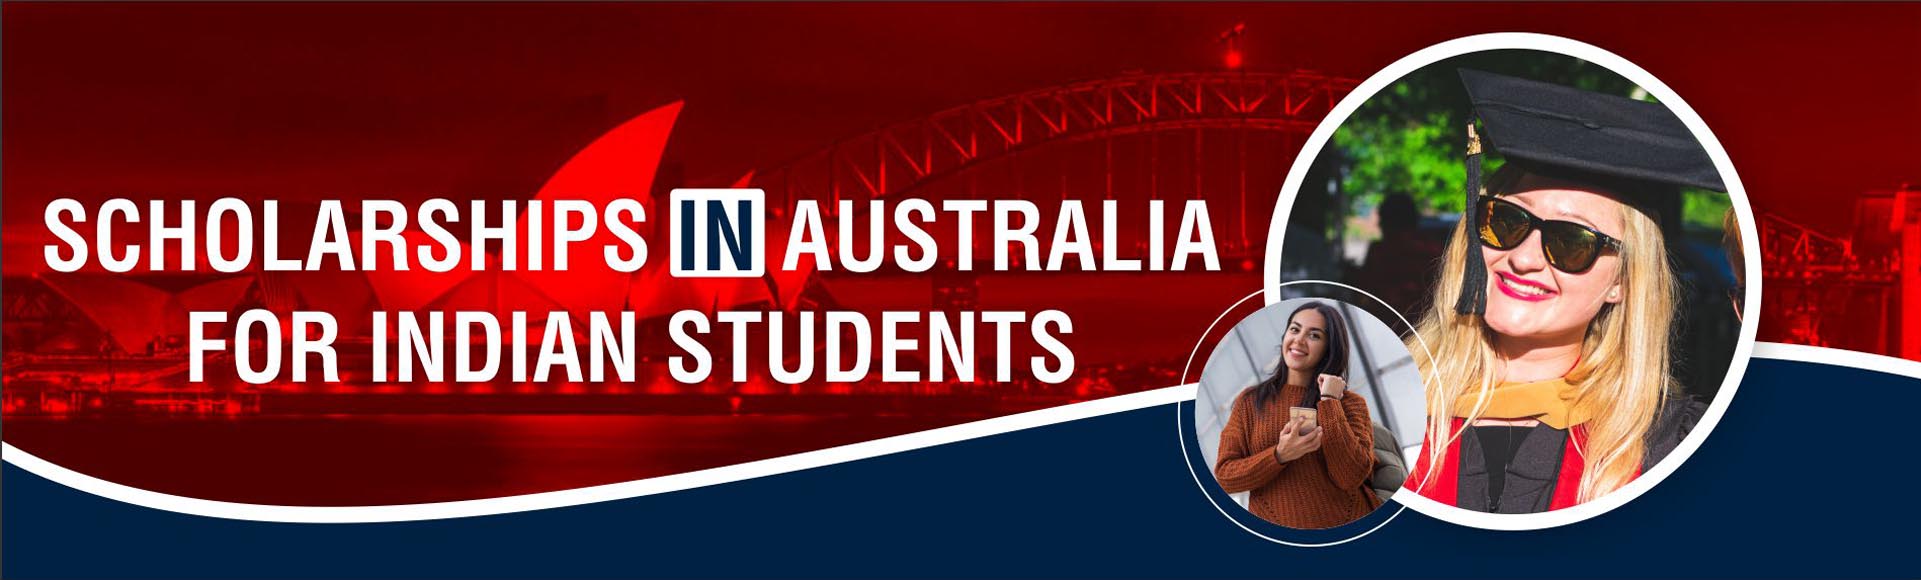 Scholarship in Australia for Indian students